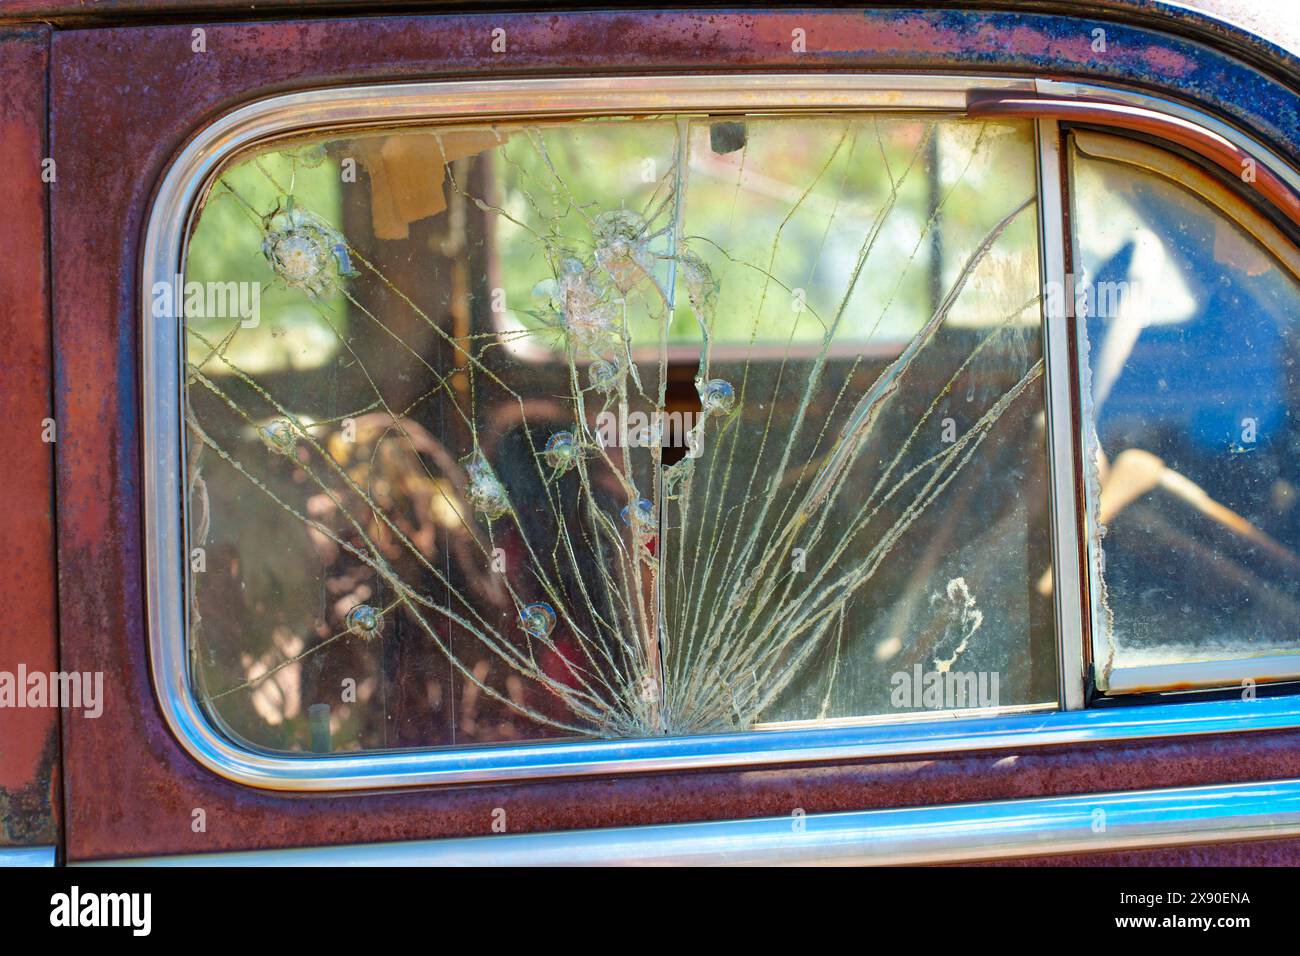 Close-up view of a vintage car’s side window that has been shattered and covered with multiple radial cracks emanating from several impact points. Stock Photo